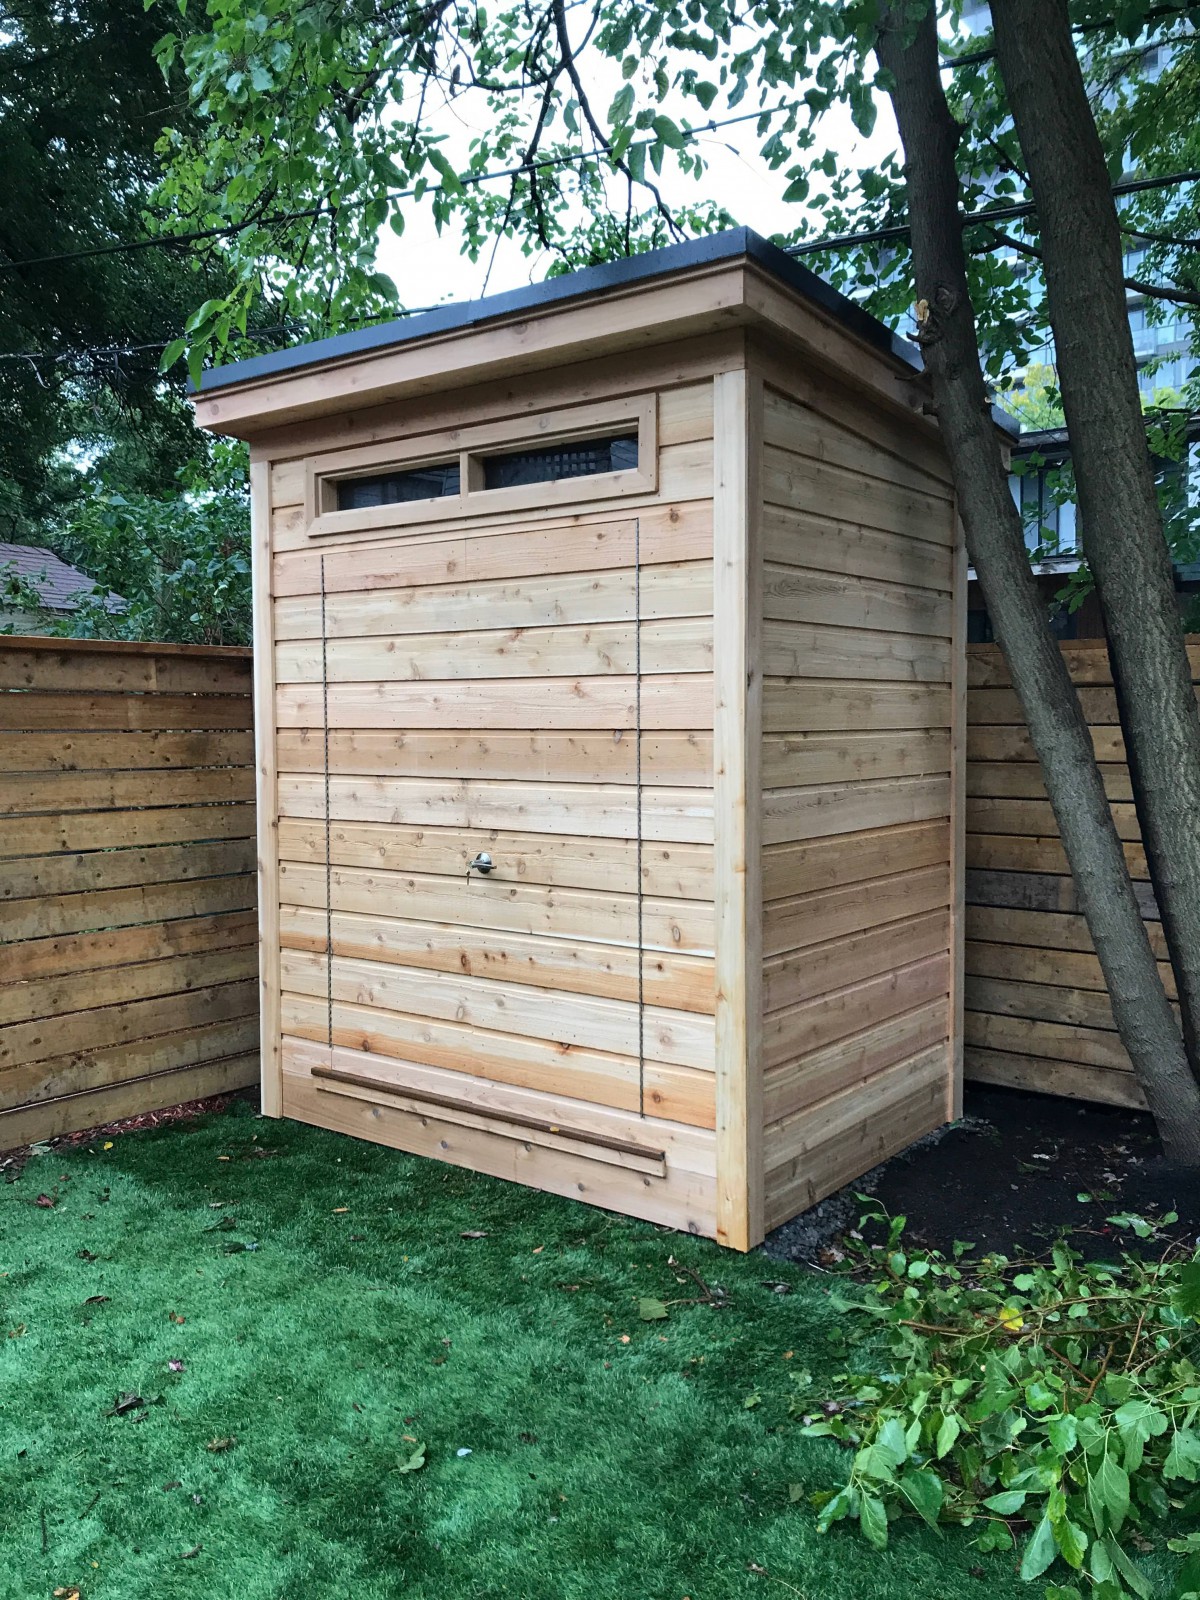 Cedar Dune shed design 5' x 7' in a backyard featuring with concealed wooden double doors and a transom window as seen from the side. Id number 242476-2. jpeg.